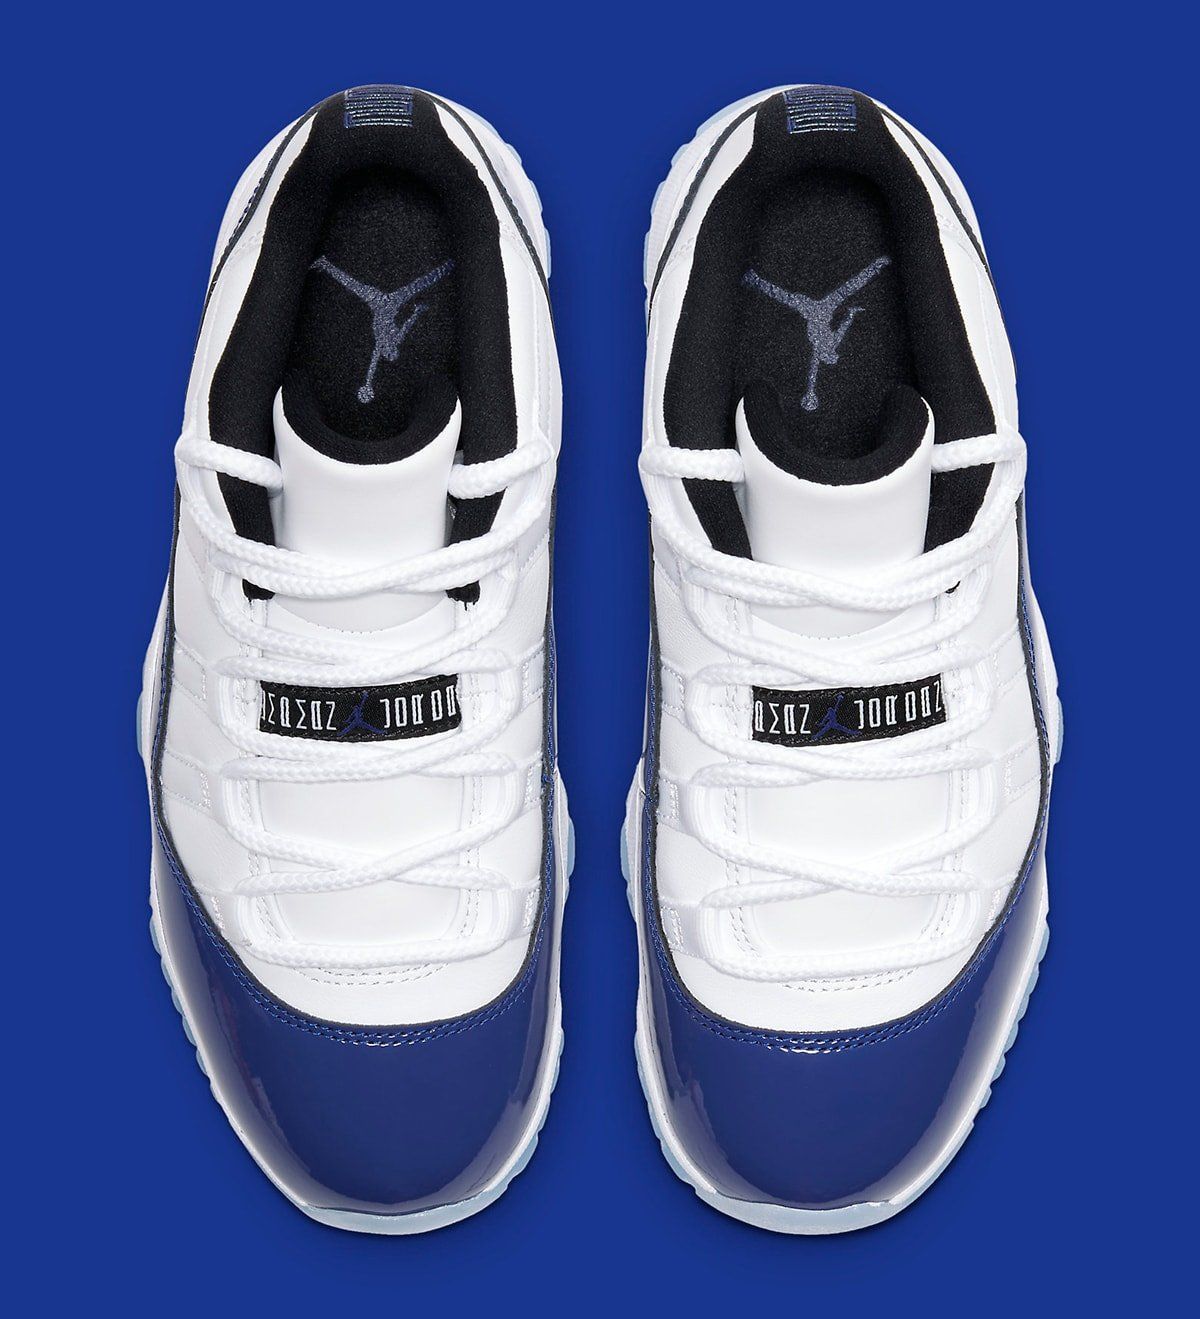 semaphore component back Where to Buy the Air Jordan 11 Low "Concord" | HOUSE OF HEAT